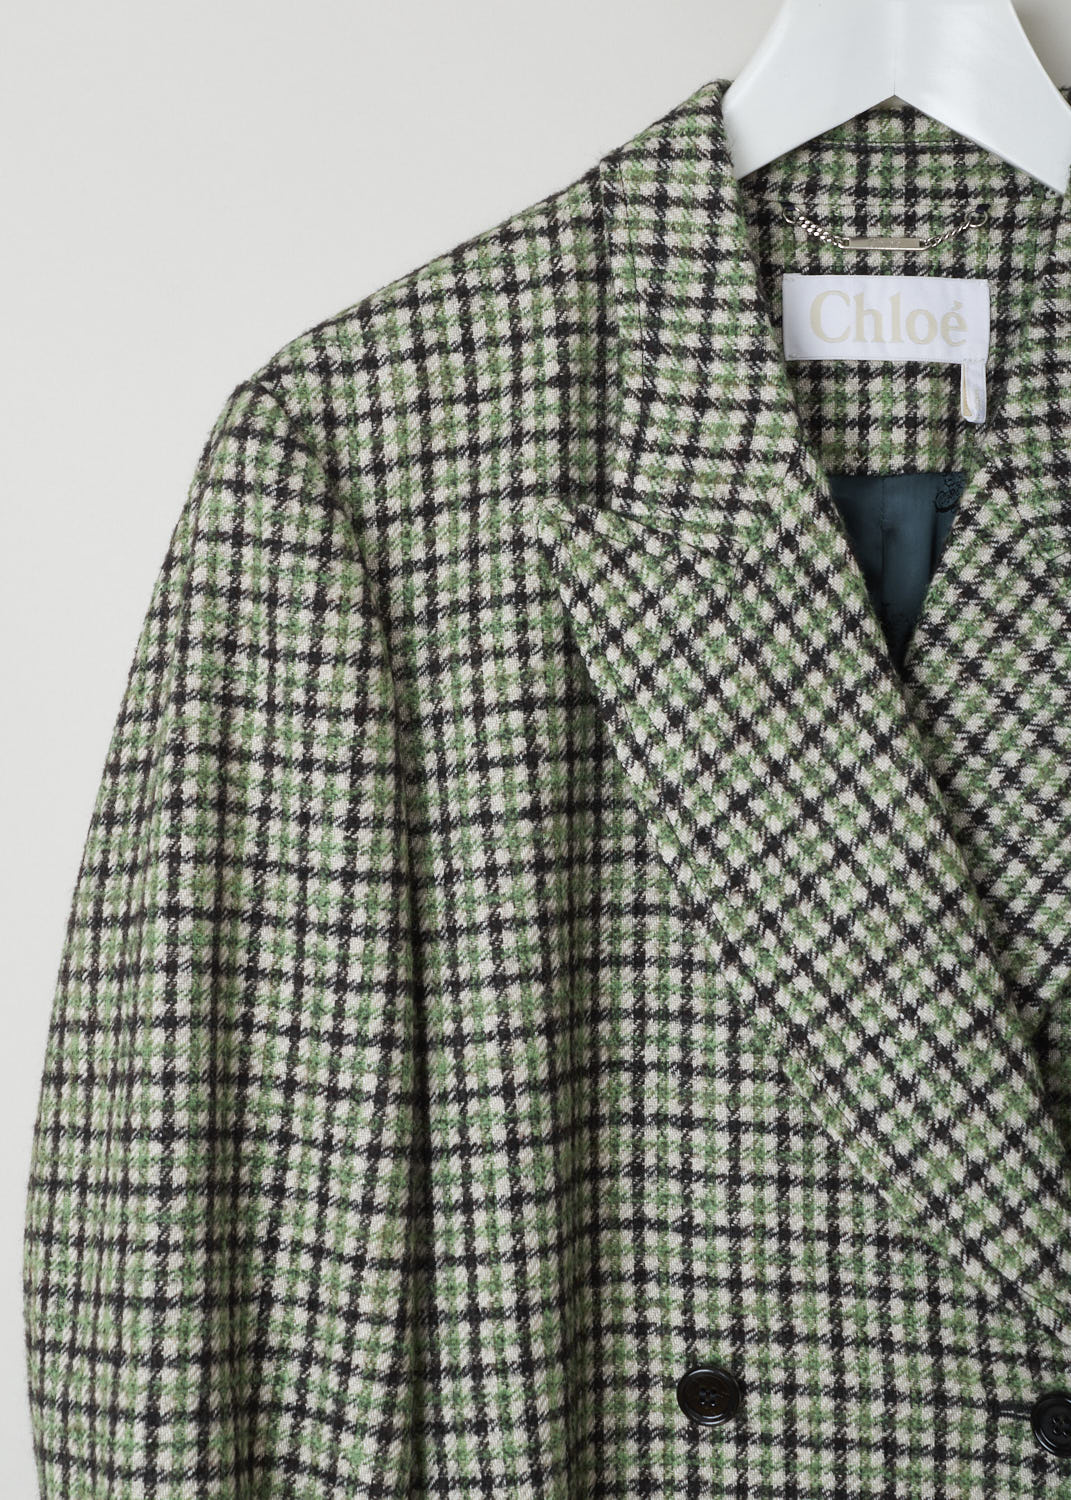 CHLOÃ‰, VIBRANT GREEN CHECK COAT, CHC21AMA1806439T40, Green, Print, Detail 1, This beautiful vibrant green check coat is soft to the touch. This double breasted coat has a peaked lapel. Across the front, two rows with buttons can be found. Also on the front are two patch pockets. Standing out are the exaggerated knitted cuffs. 